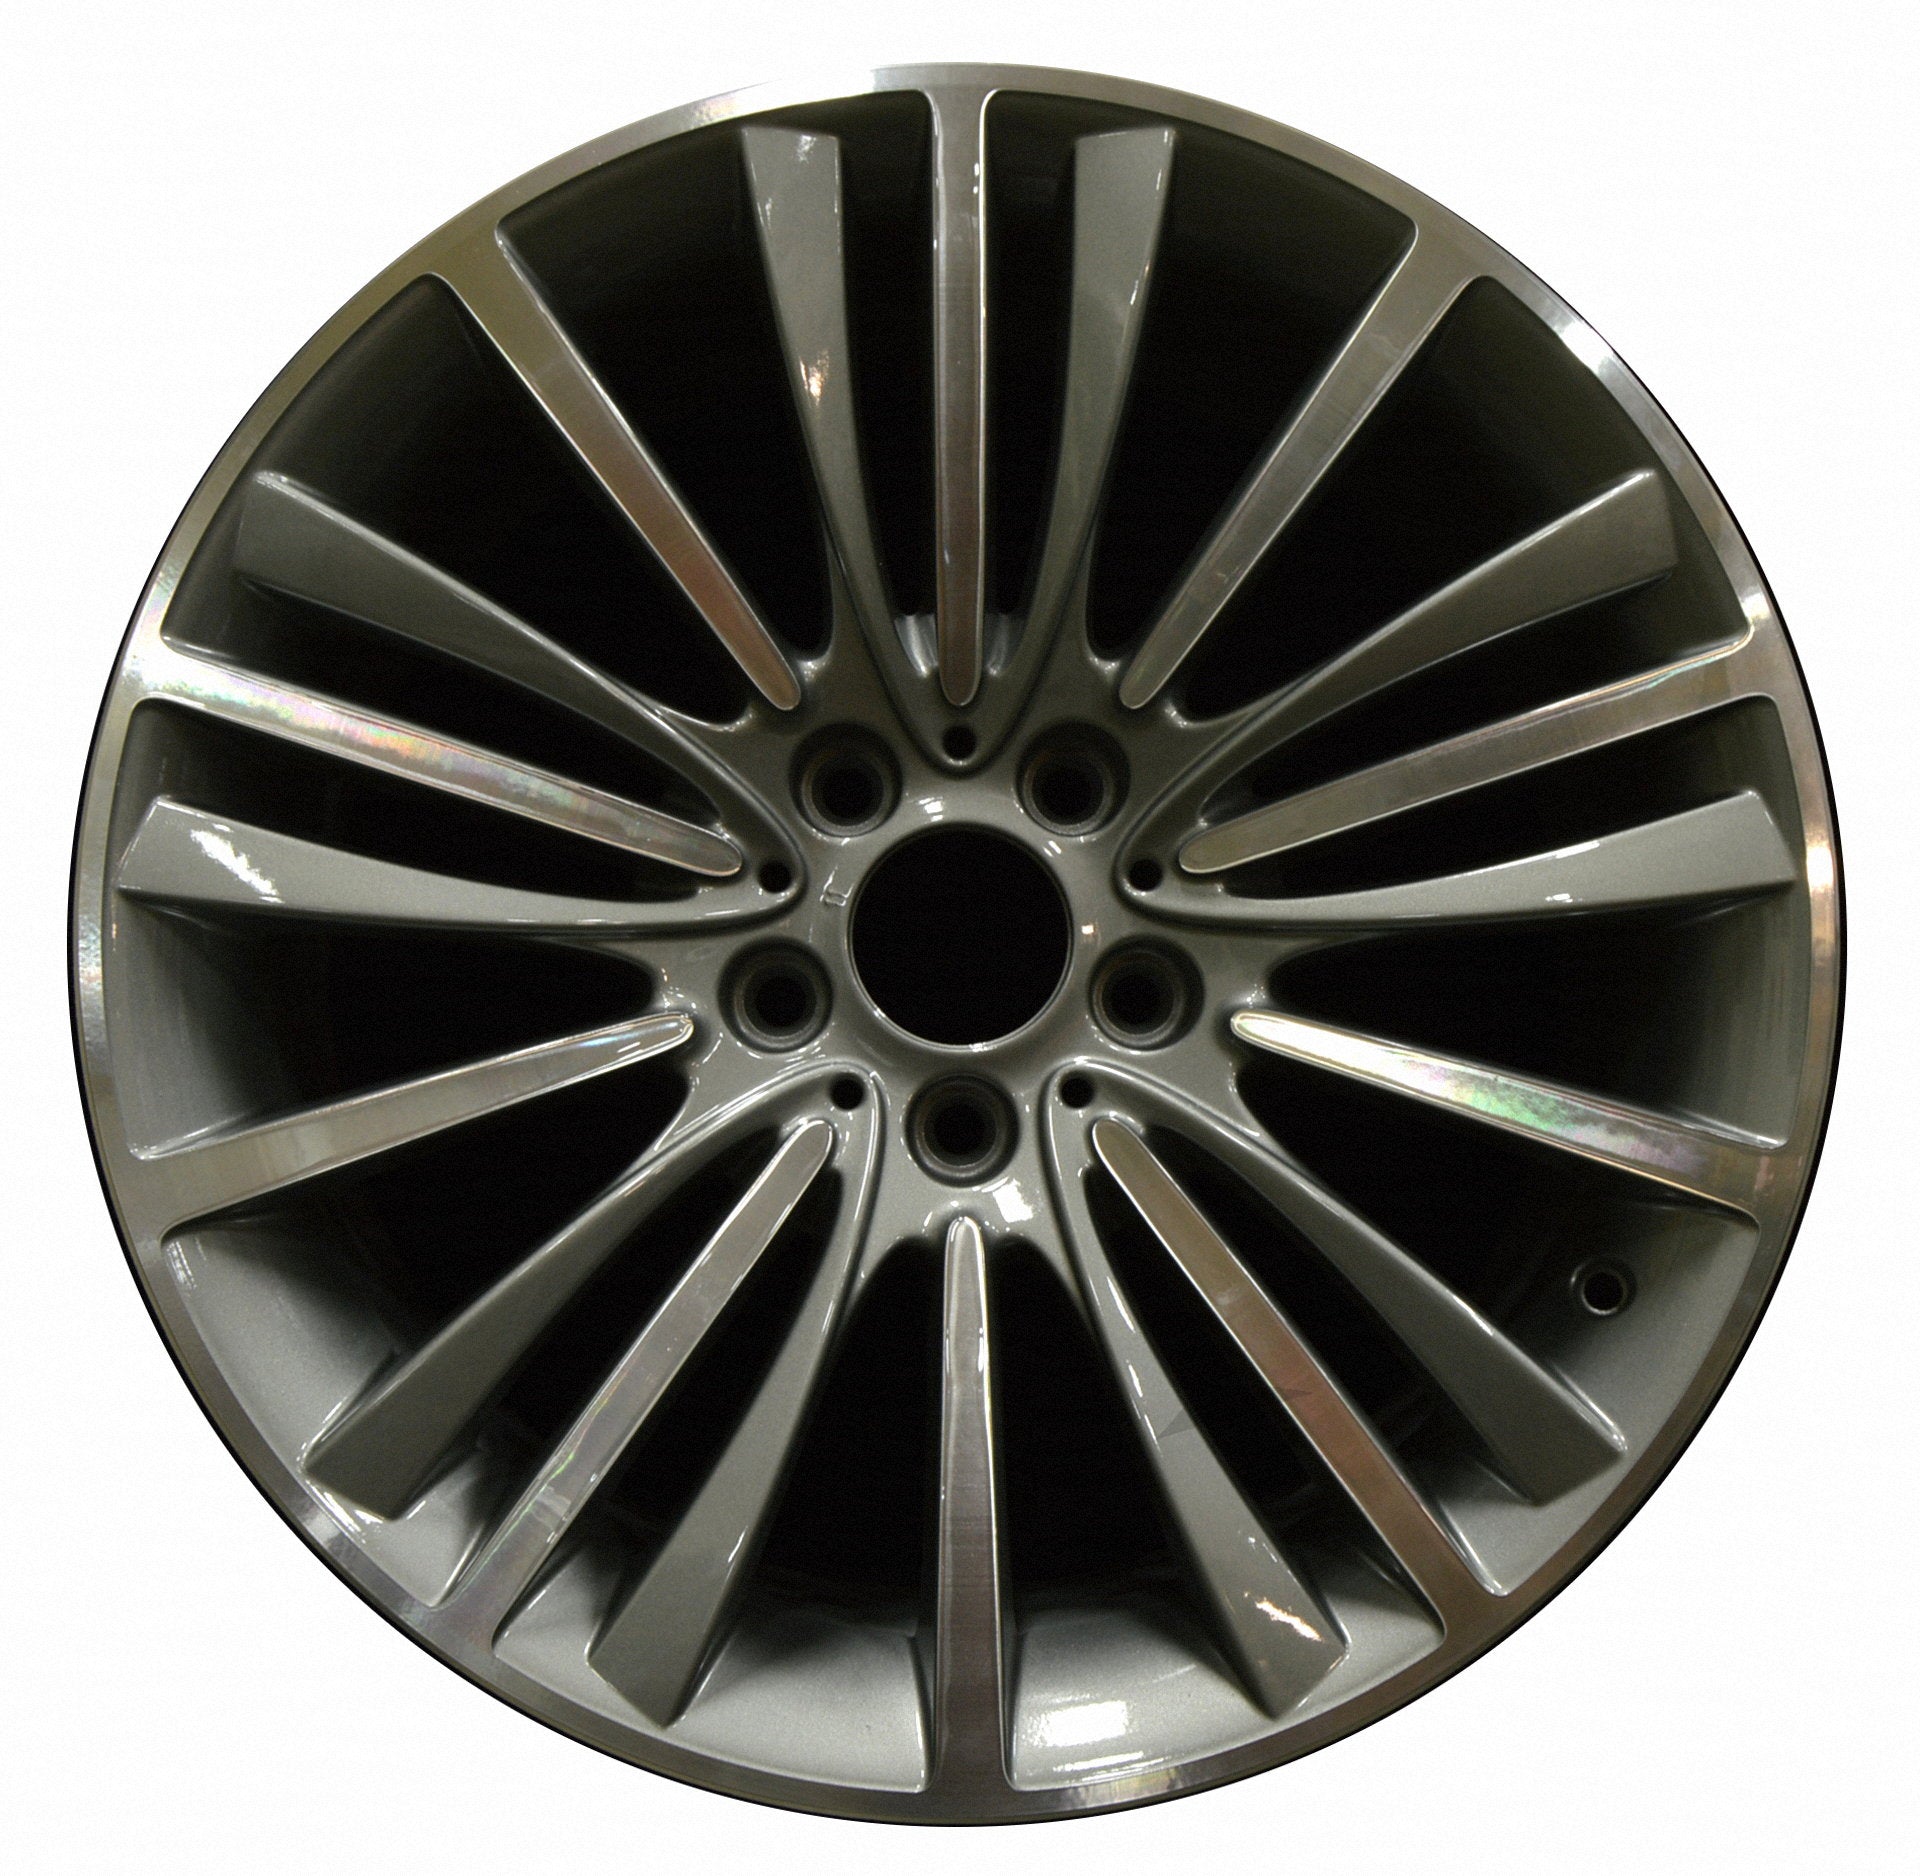 BMW 528i  2011, 2012, 2013, 2014, 2015, 2016 Factory OEM Car Wheel Size 19x8.5 Alloy WAO.71582FT.LC09.MABRT